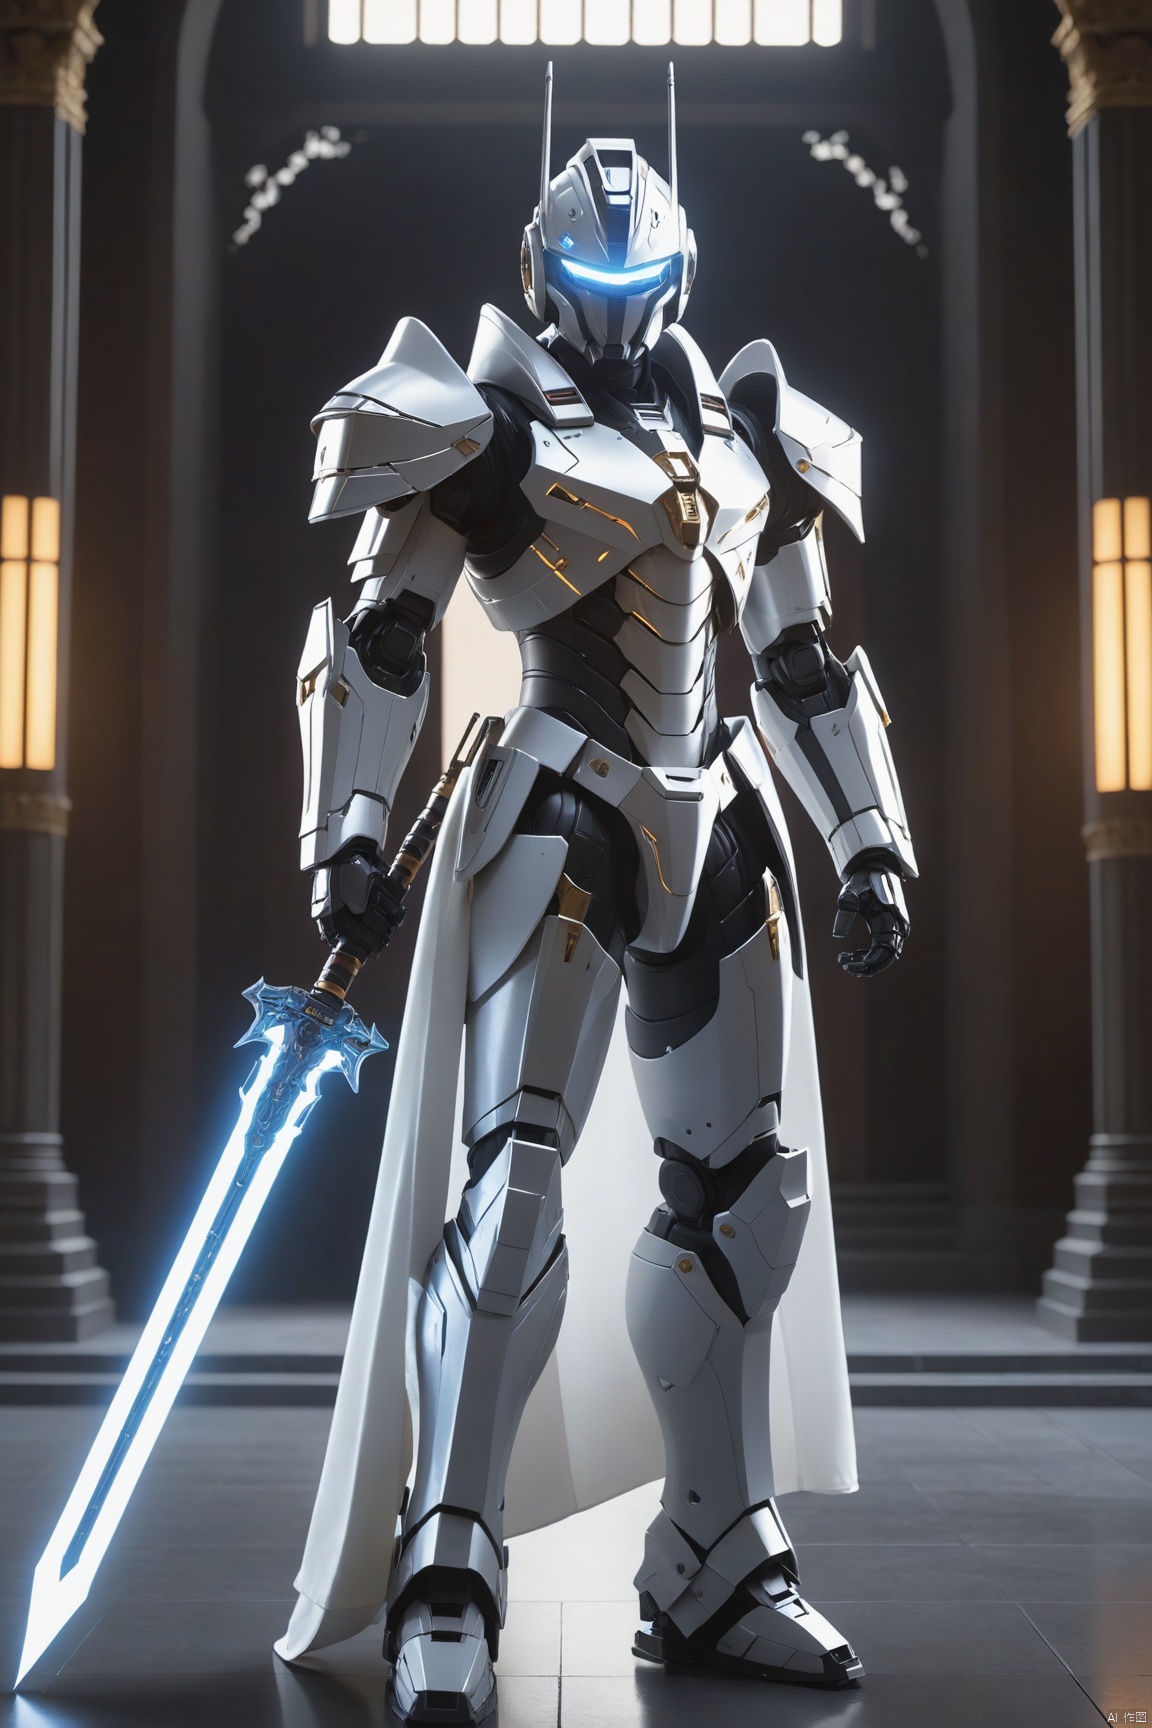  Metal armor, metallic texture, 1boy, solo, A HUBG_Mecha_Armor robot, black robotic hat, white robe, a glowing halo behind it,holding a glowing energy spear, standing inside an imperial palace, 

cinematic scenes, cinematic shots, cinematic lighting, volumetric lighting, ultra-detailed, highly detailed, hyper-detailed, realistic, ultra-realistic, hyperrealistic, HD, IMAX, 8K resolutions, ultra resolutions, sharp focus, magnificent, best quality, masterpiece, Oouguancong